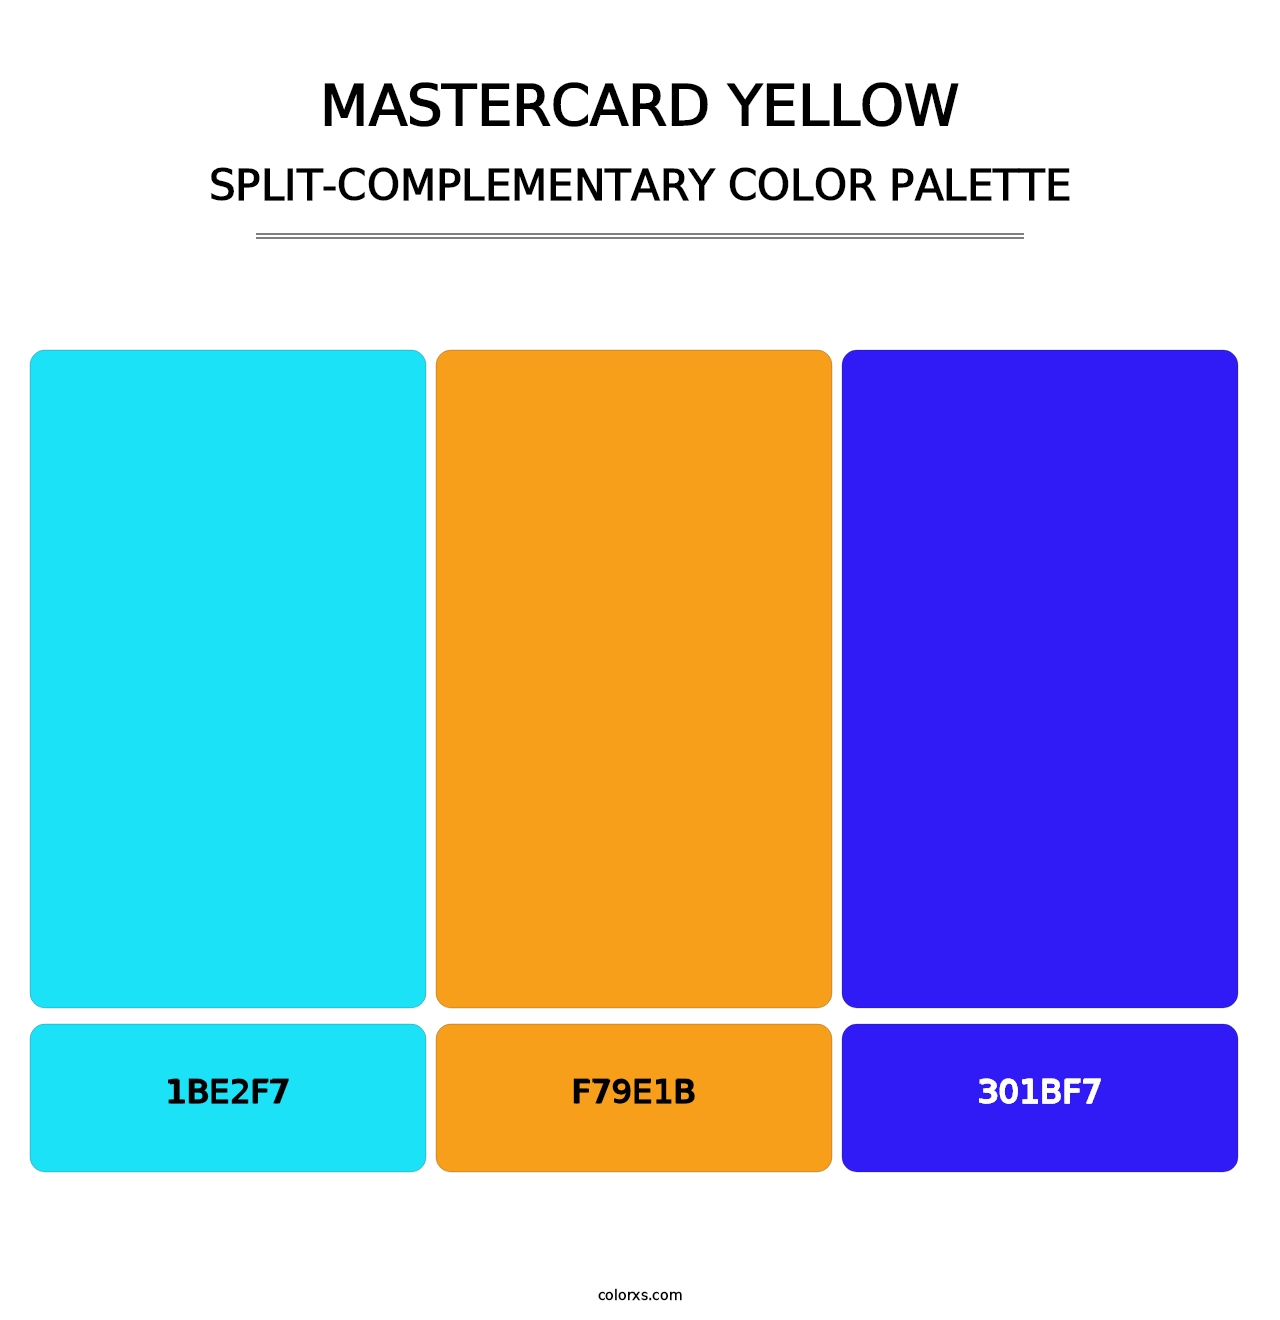 Mastercard Yellow - Split-Complementary Color Palette